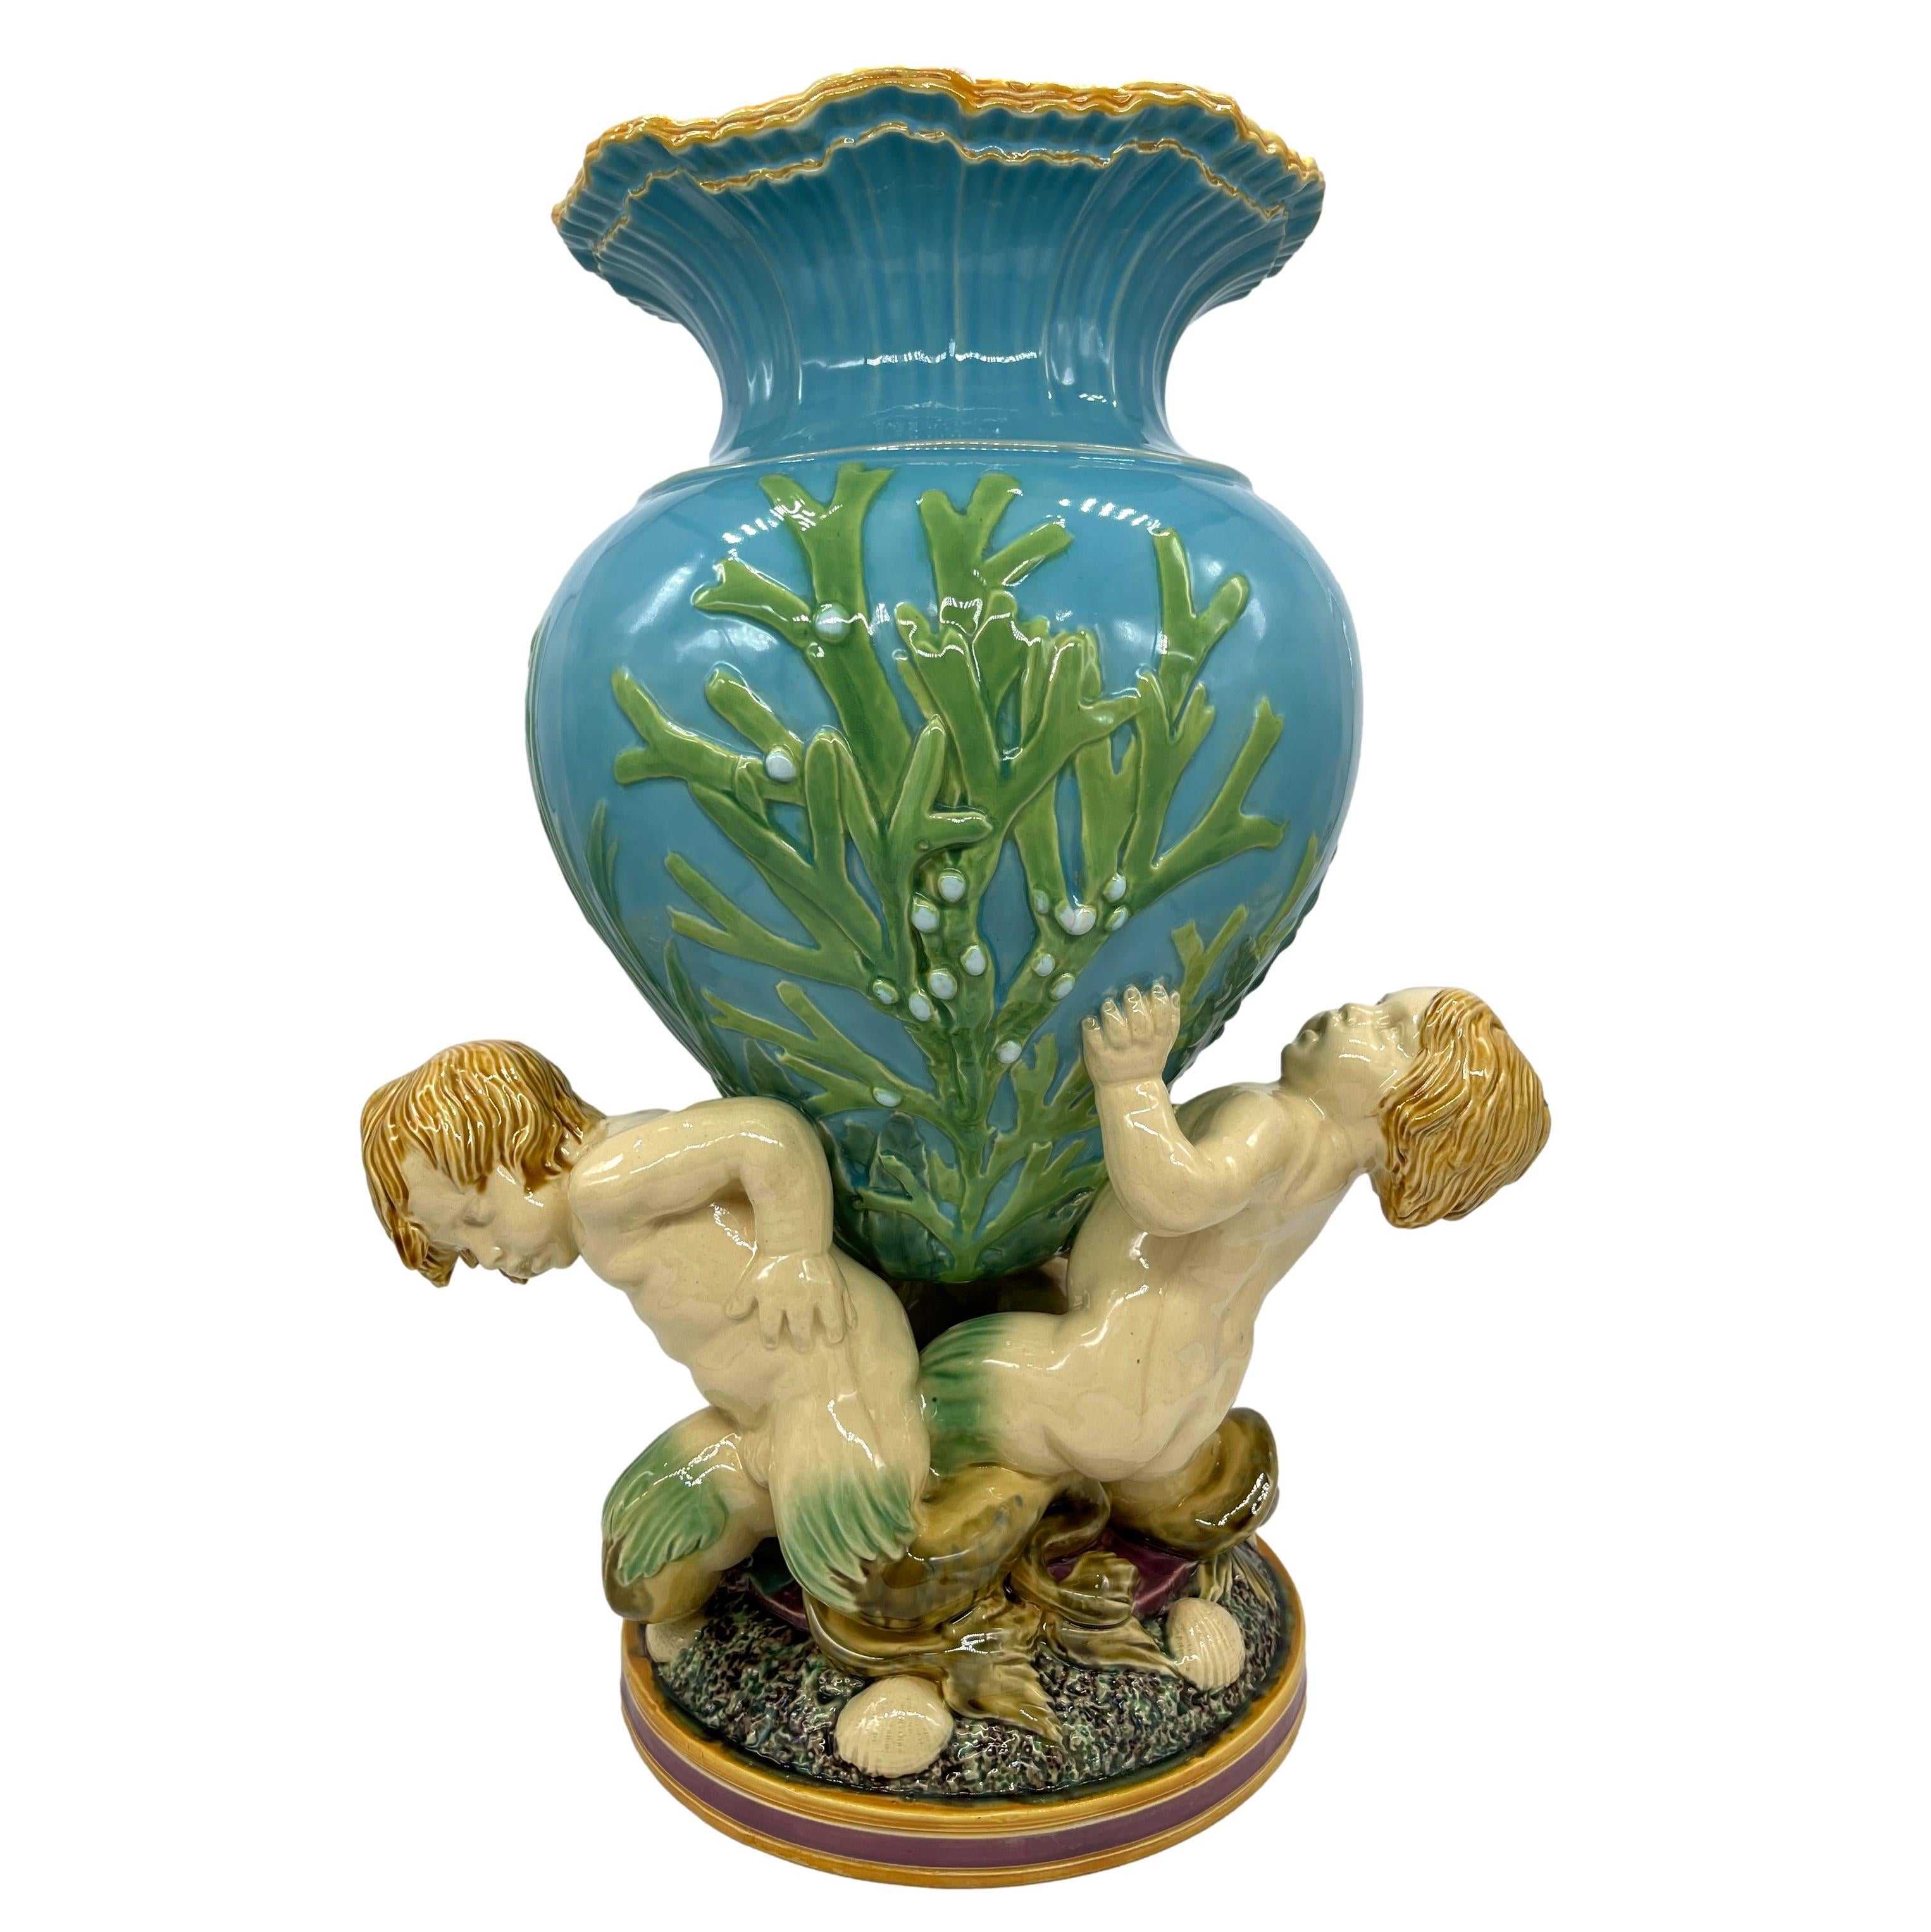 Large Minton Majolica 'Marine Flower Vase,' modeled as Triton's Golden Palace at the bottom of the sea, the amphora-shaped vase with green glazed seaweed on a turquoise ground, supported by three young Tritons, on an 8-in pedestal base with